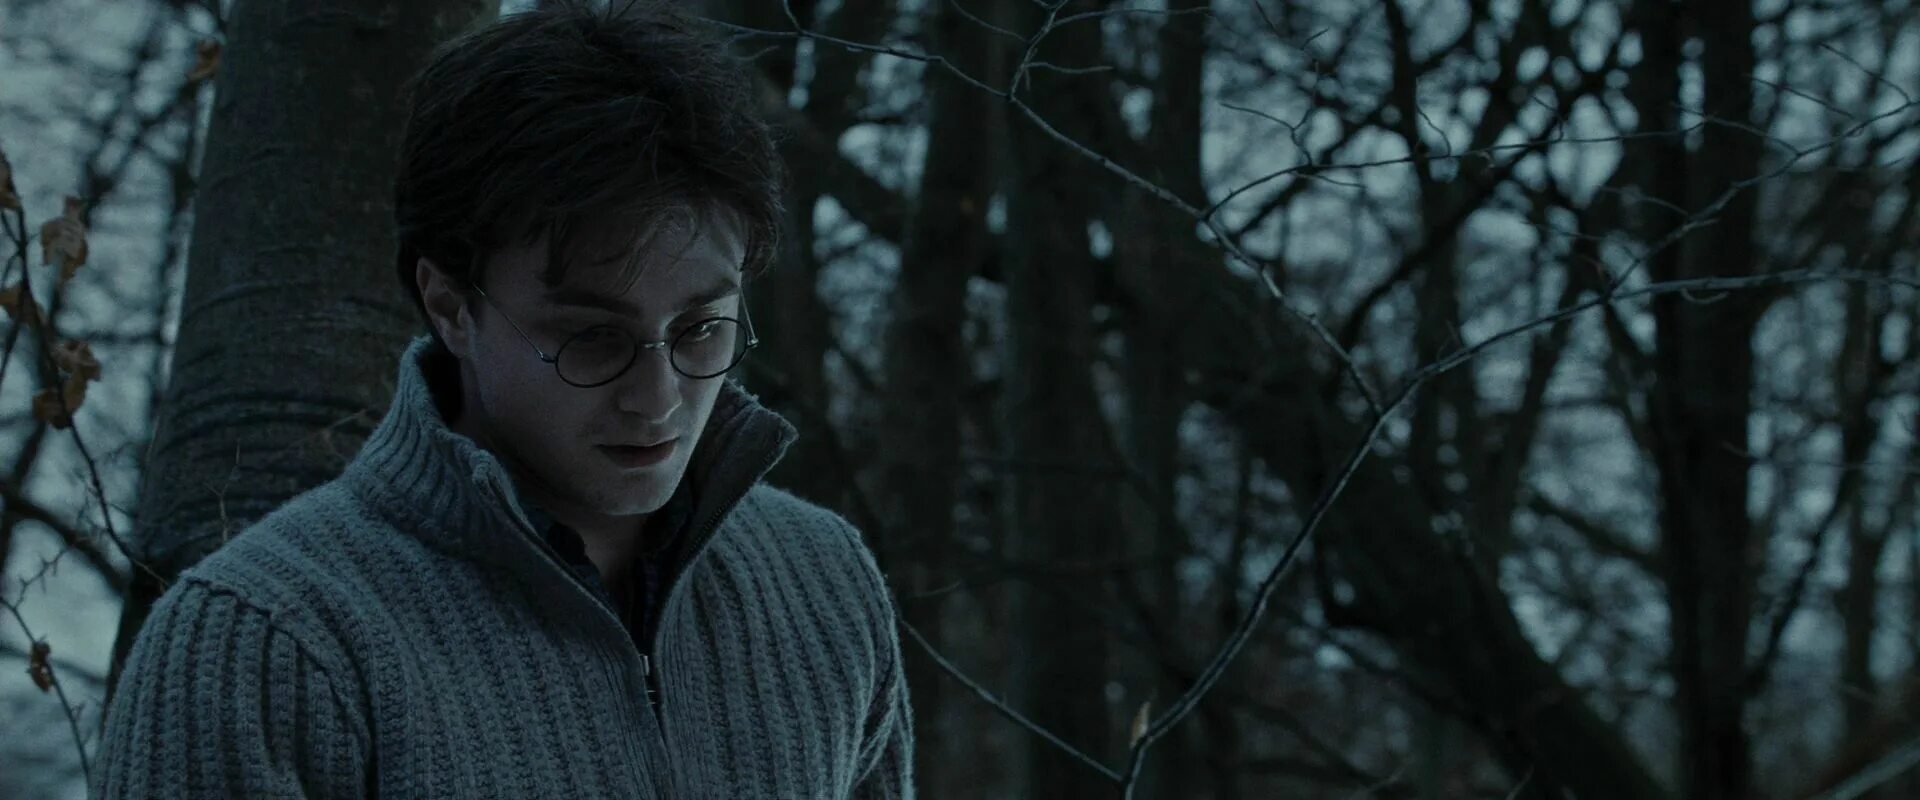 Аудиокниги дары смерти 1. Harry Potter and the Deathly Hallows: Part 1 (2010).